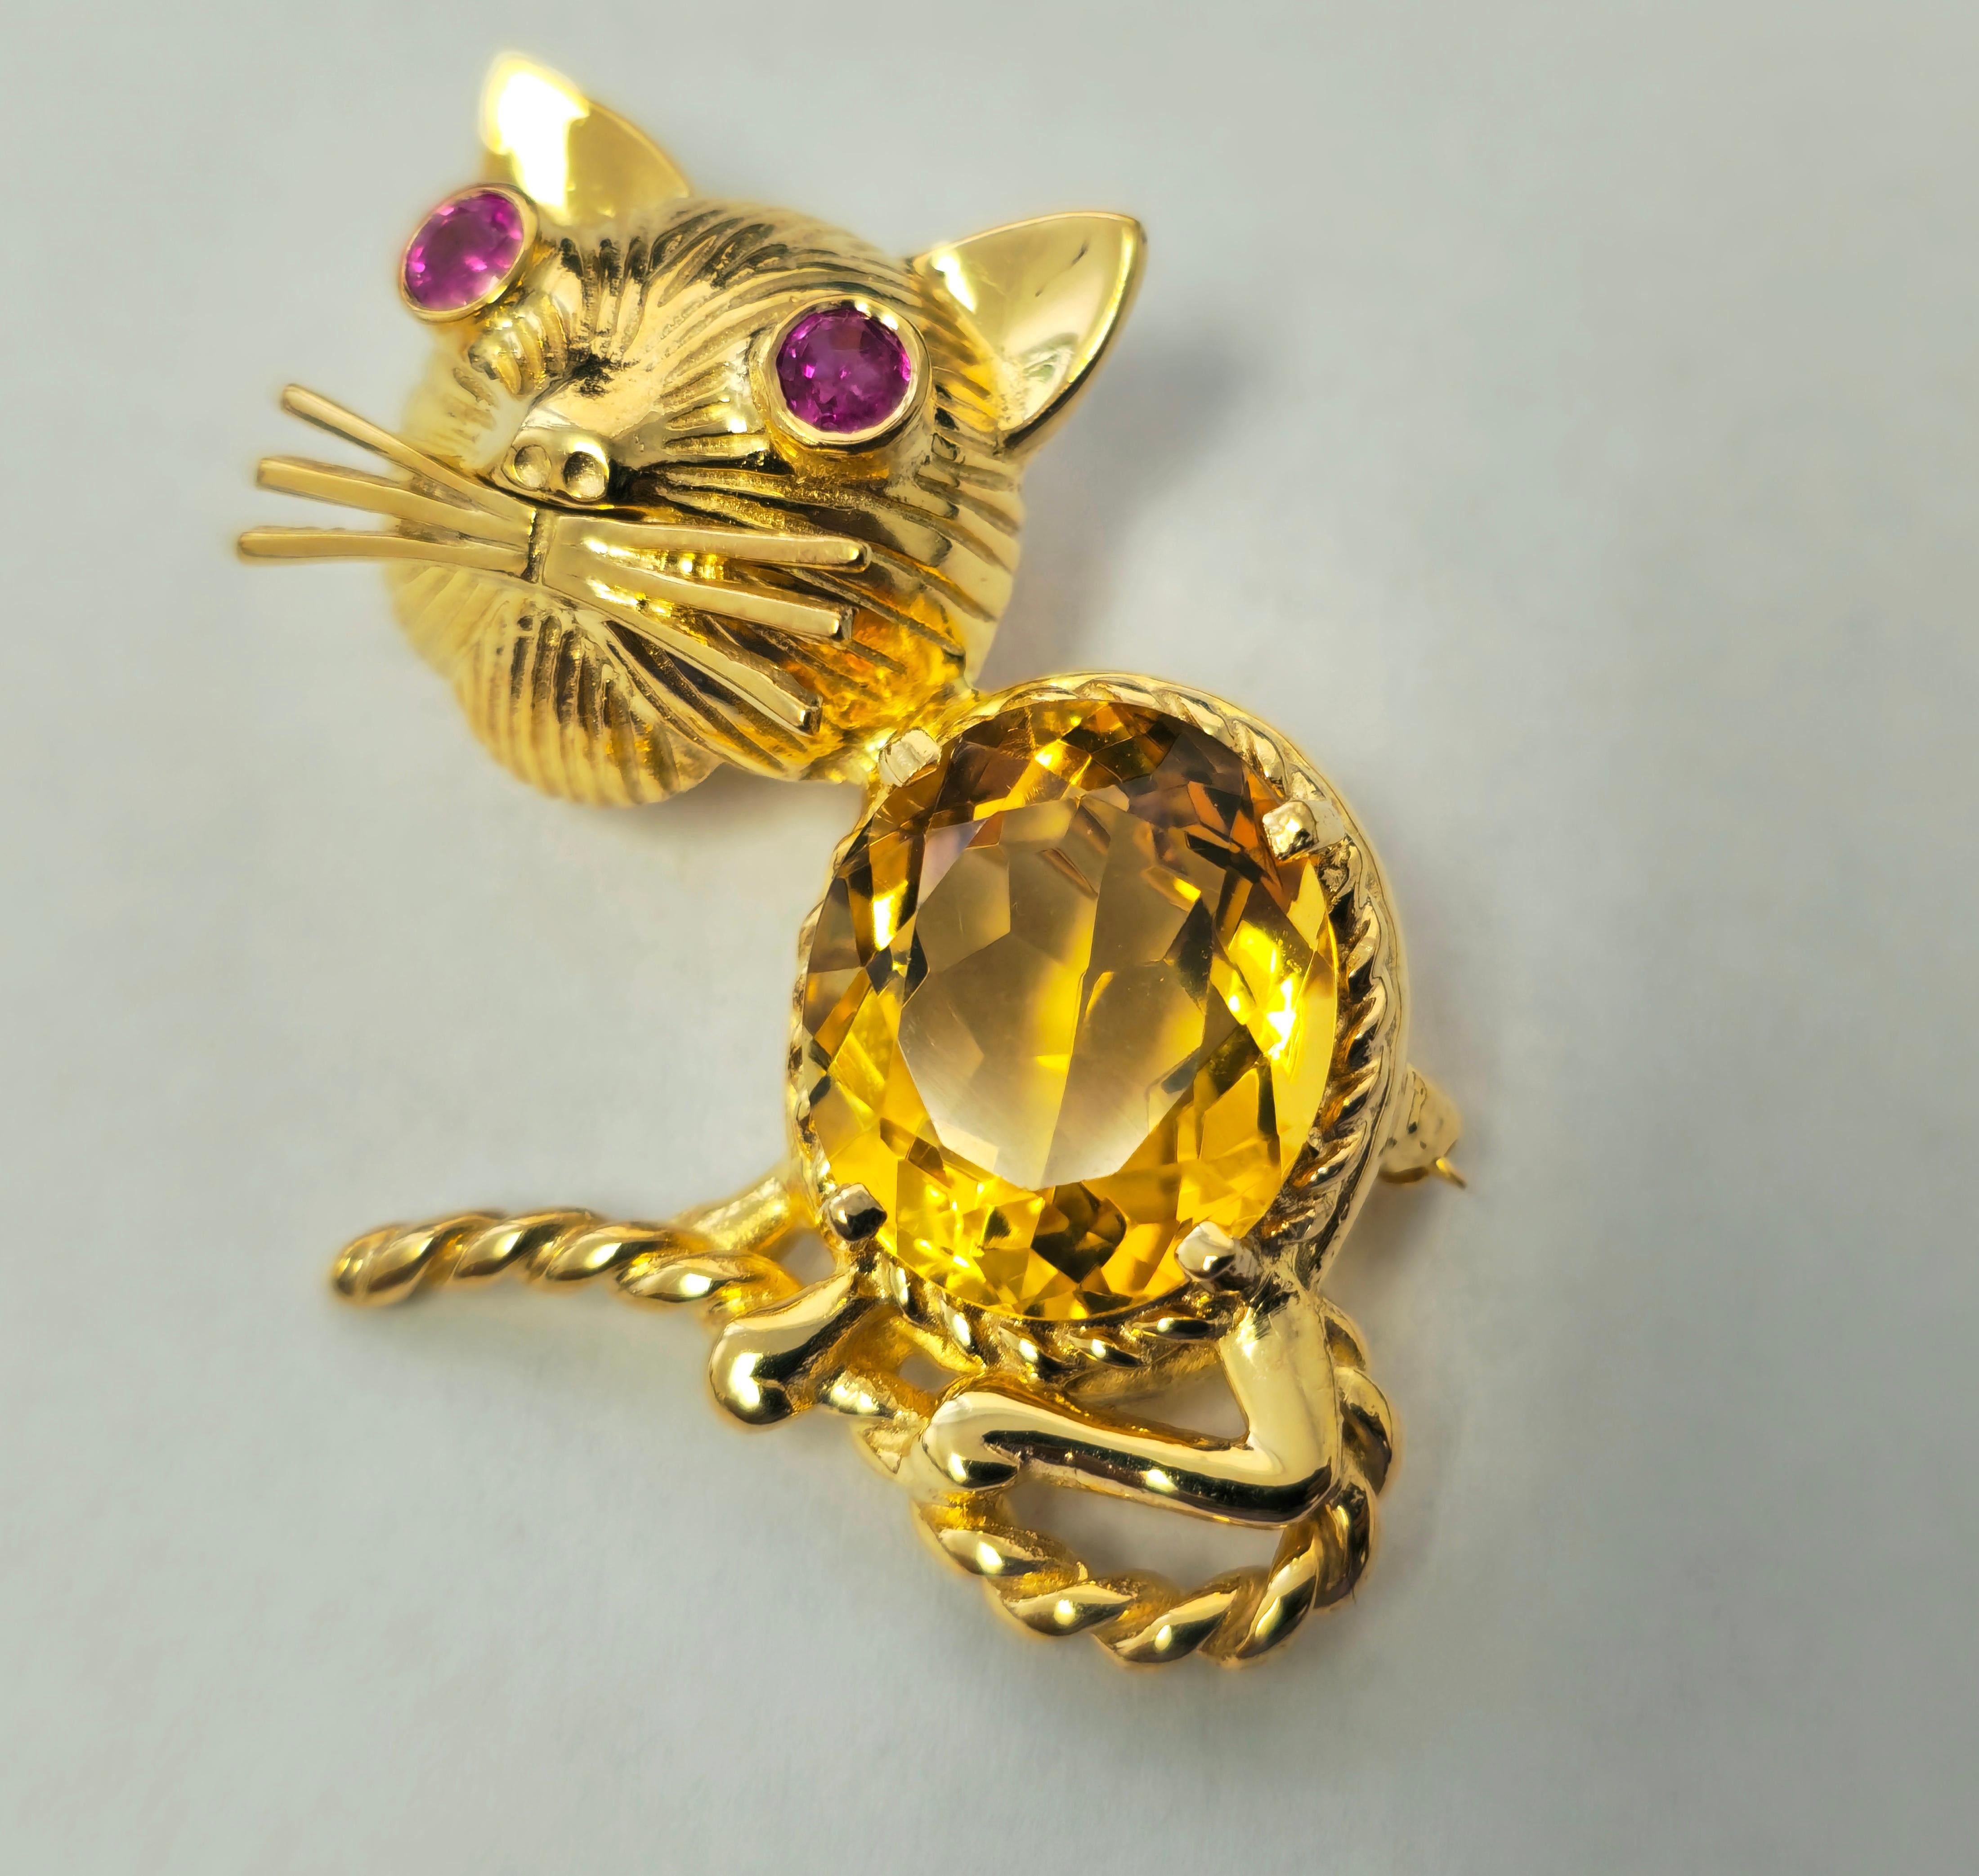 This exquisite vintage pin showcases a captivating 8.43 carat oval-shaped natural yellow citrine, complemented by a delicate 0.19 carat round ruby, all set in lustrous 14k yellow gold. With a weight of 11.30 grams and dimensions of 1.30 inches, this